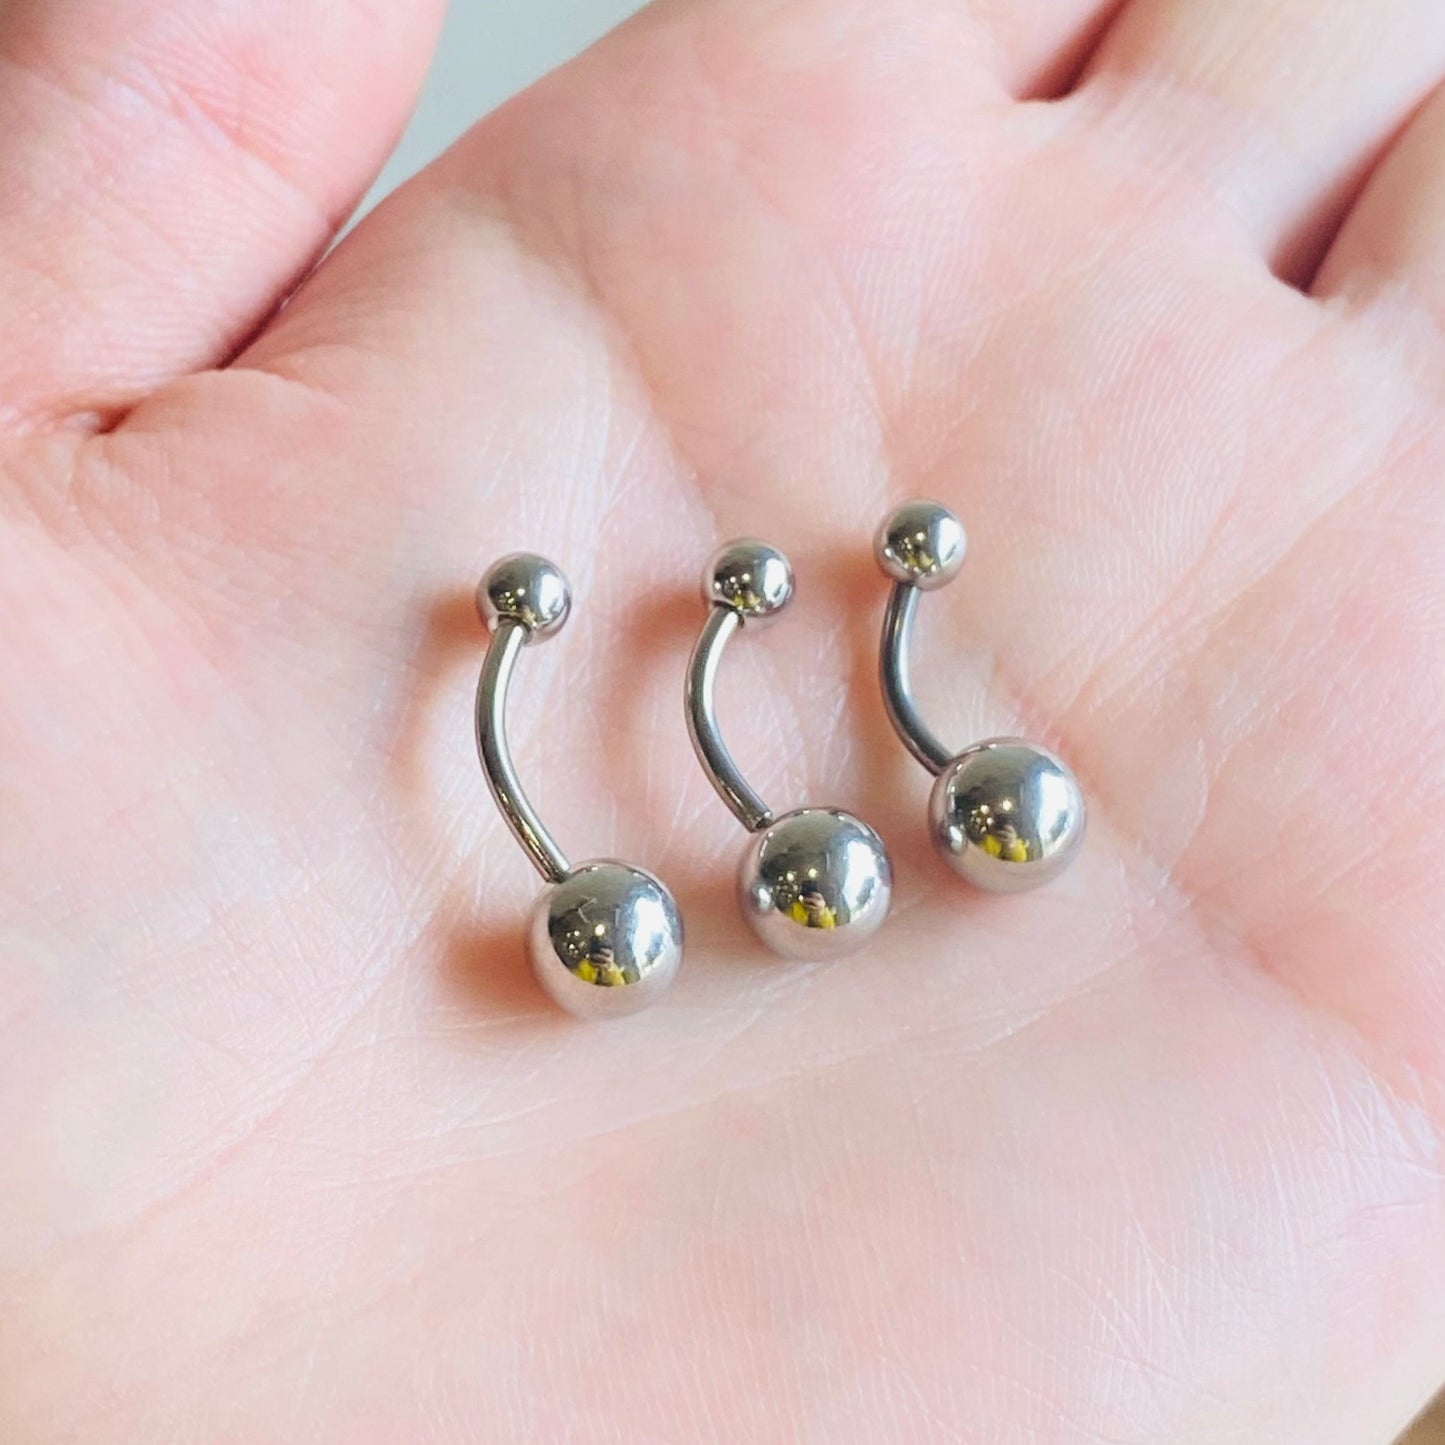 Steel Belly Ring 5+8mm Ball